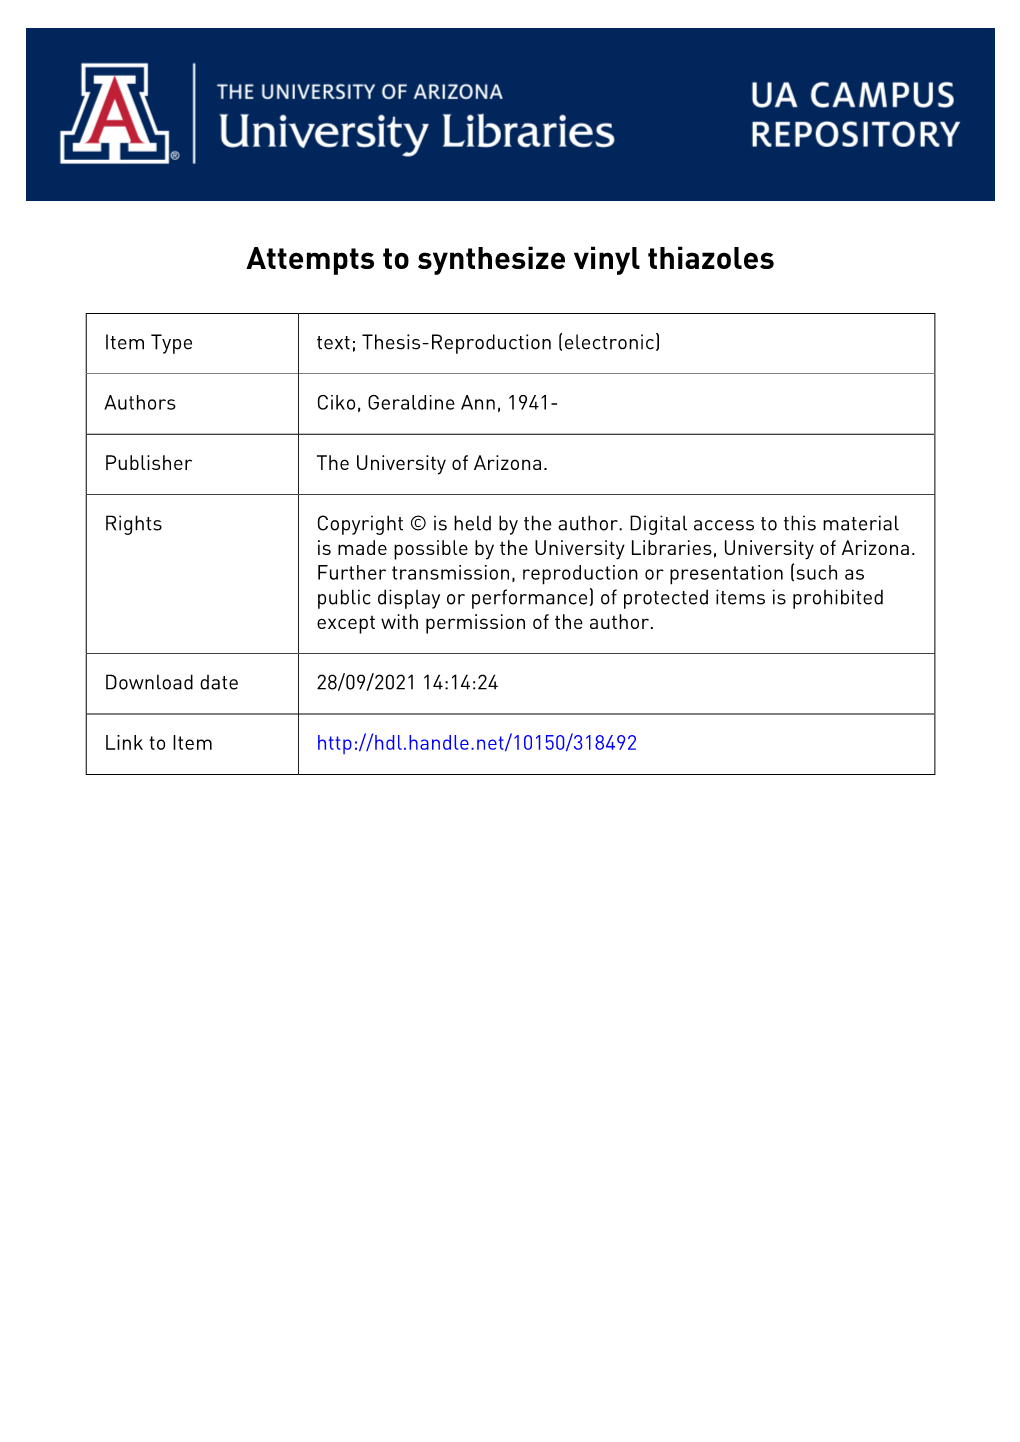 ATTEMPTS to SYNTHESIZE VINYL THIAZOLES by Geraldine Ann Ciko